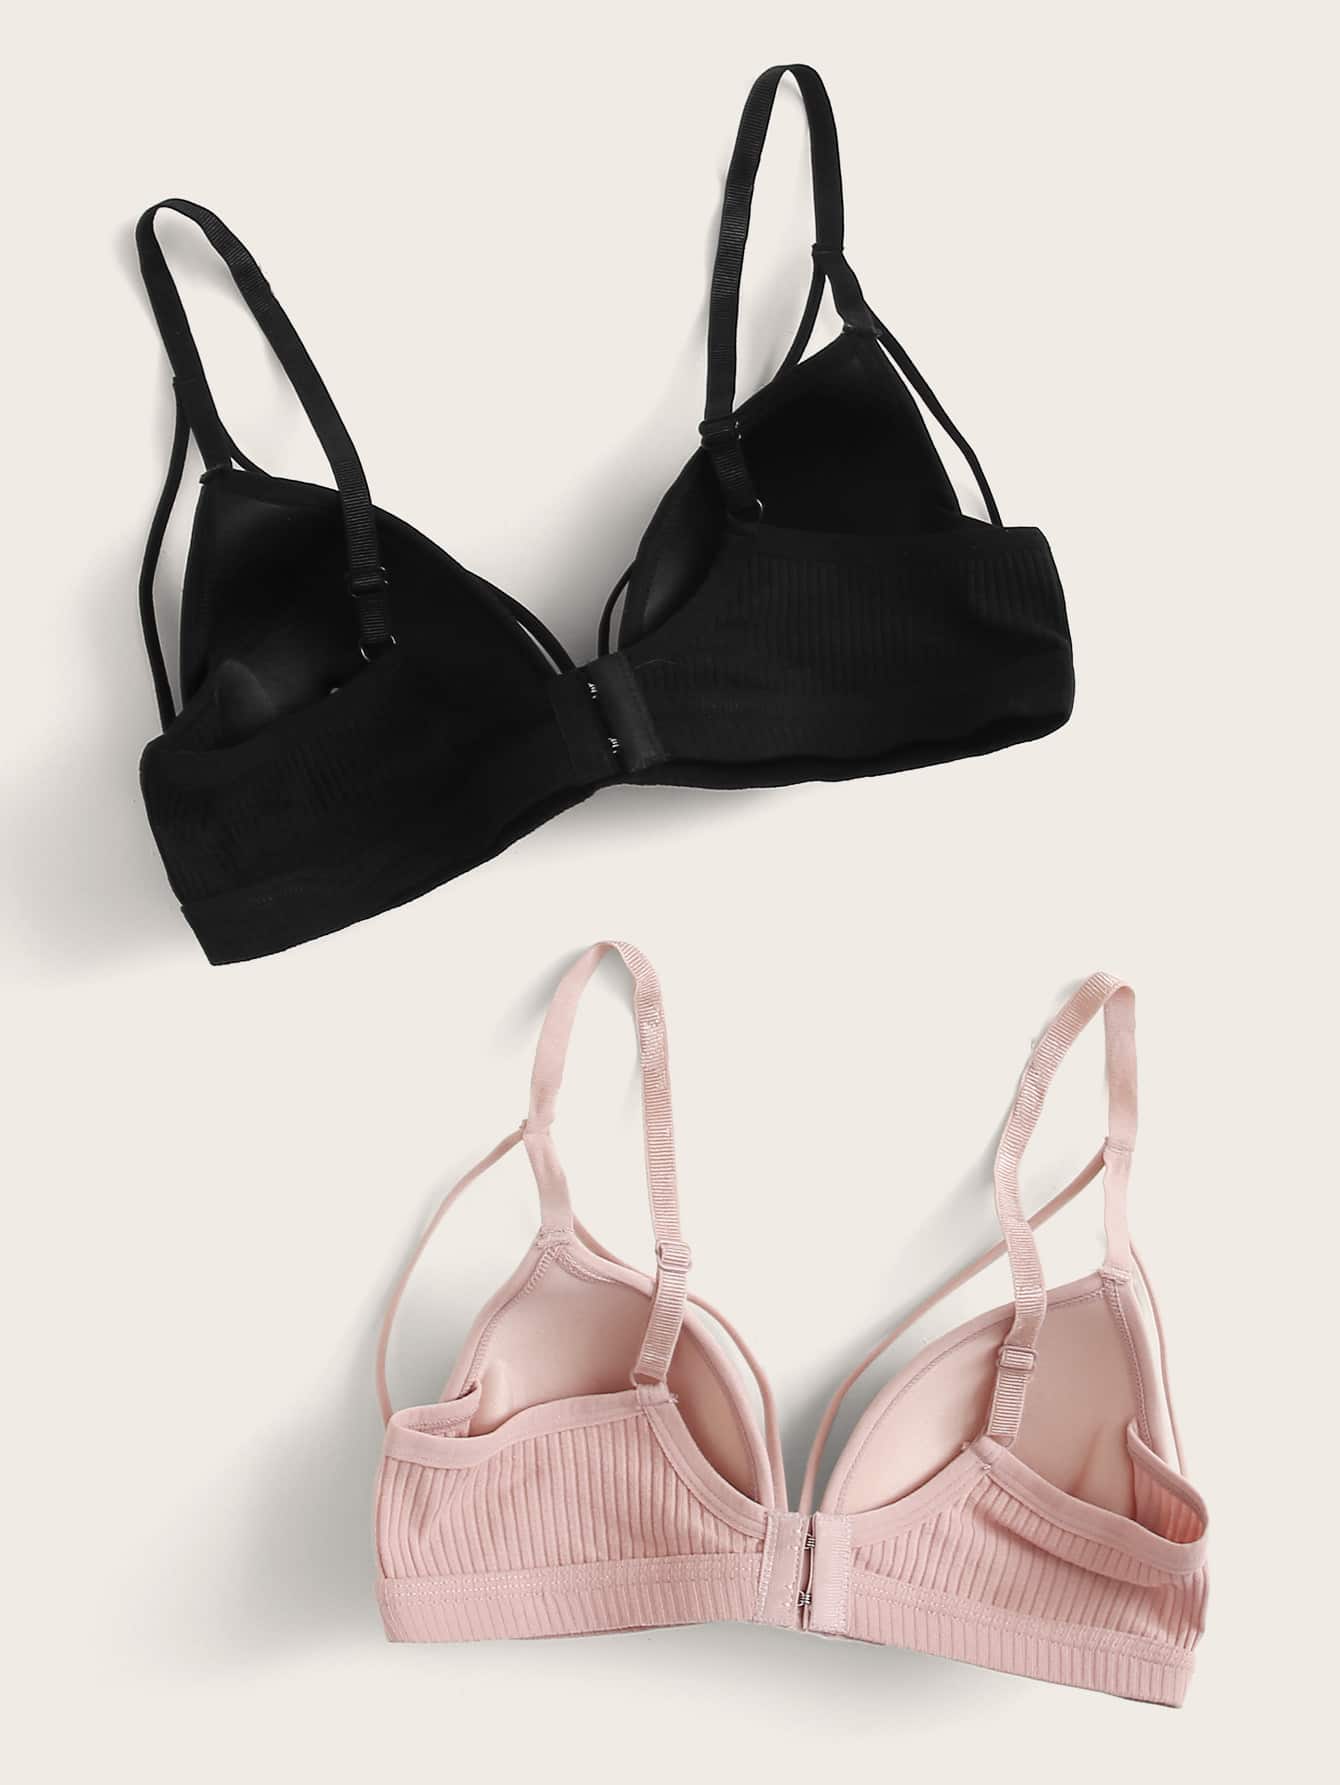 Charlie Chest Harness Bra // White, Black, Pink or Red Adjustable